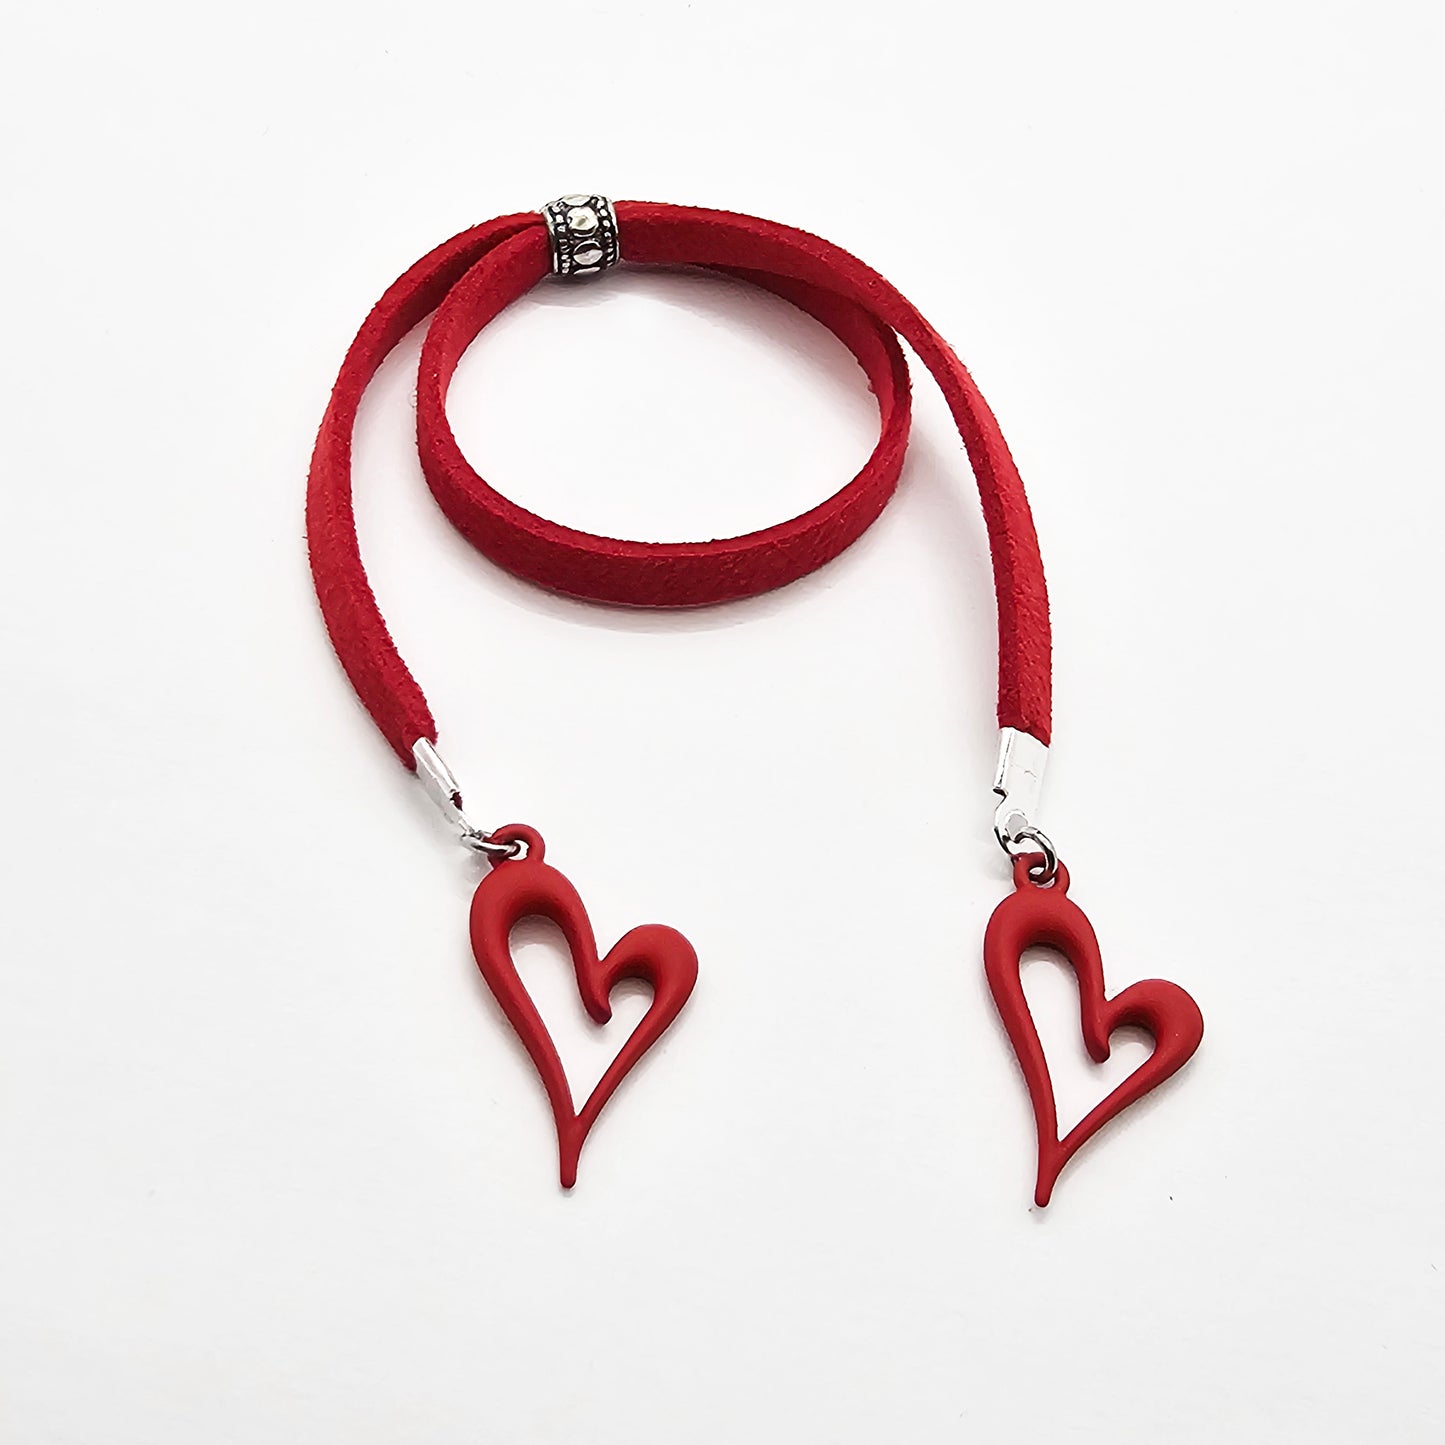 Naughty Penis Jewelry for Men's Valentine's Day Gift. Red Penis Noose with Hearts.